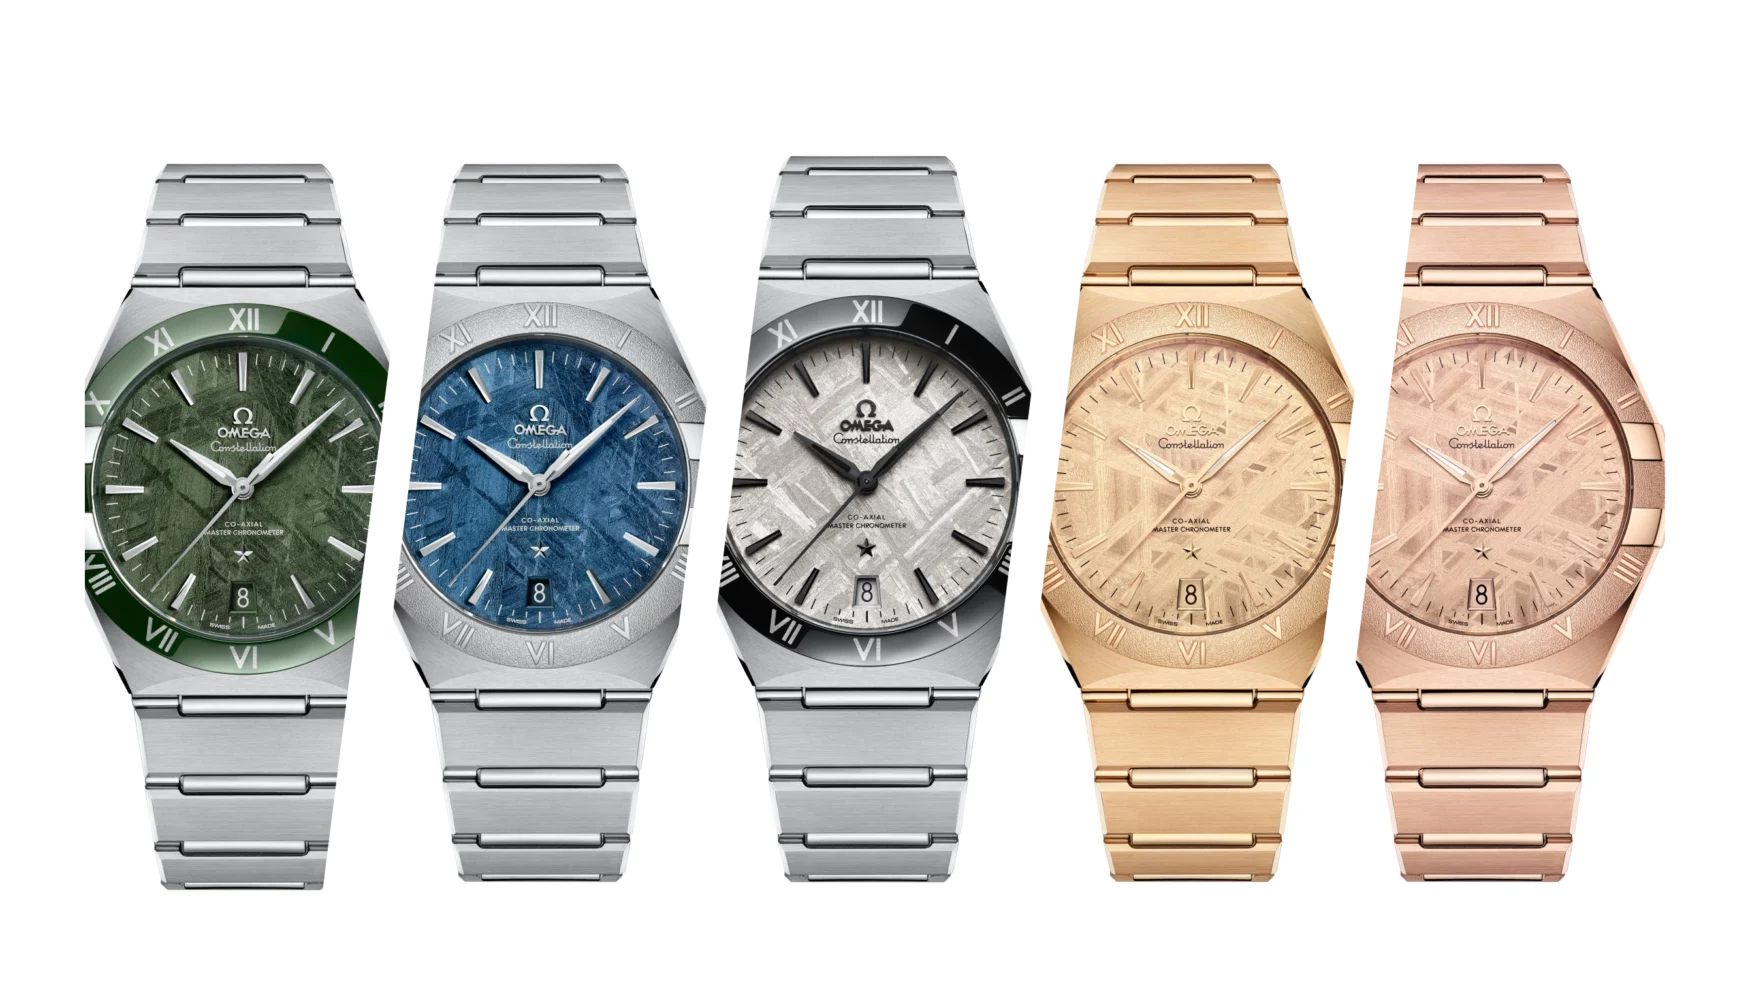 Omega just launched 20 new Constellation references in 4 sizes that all have meteorite dials